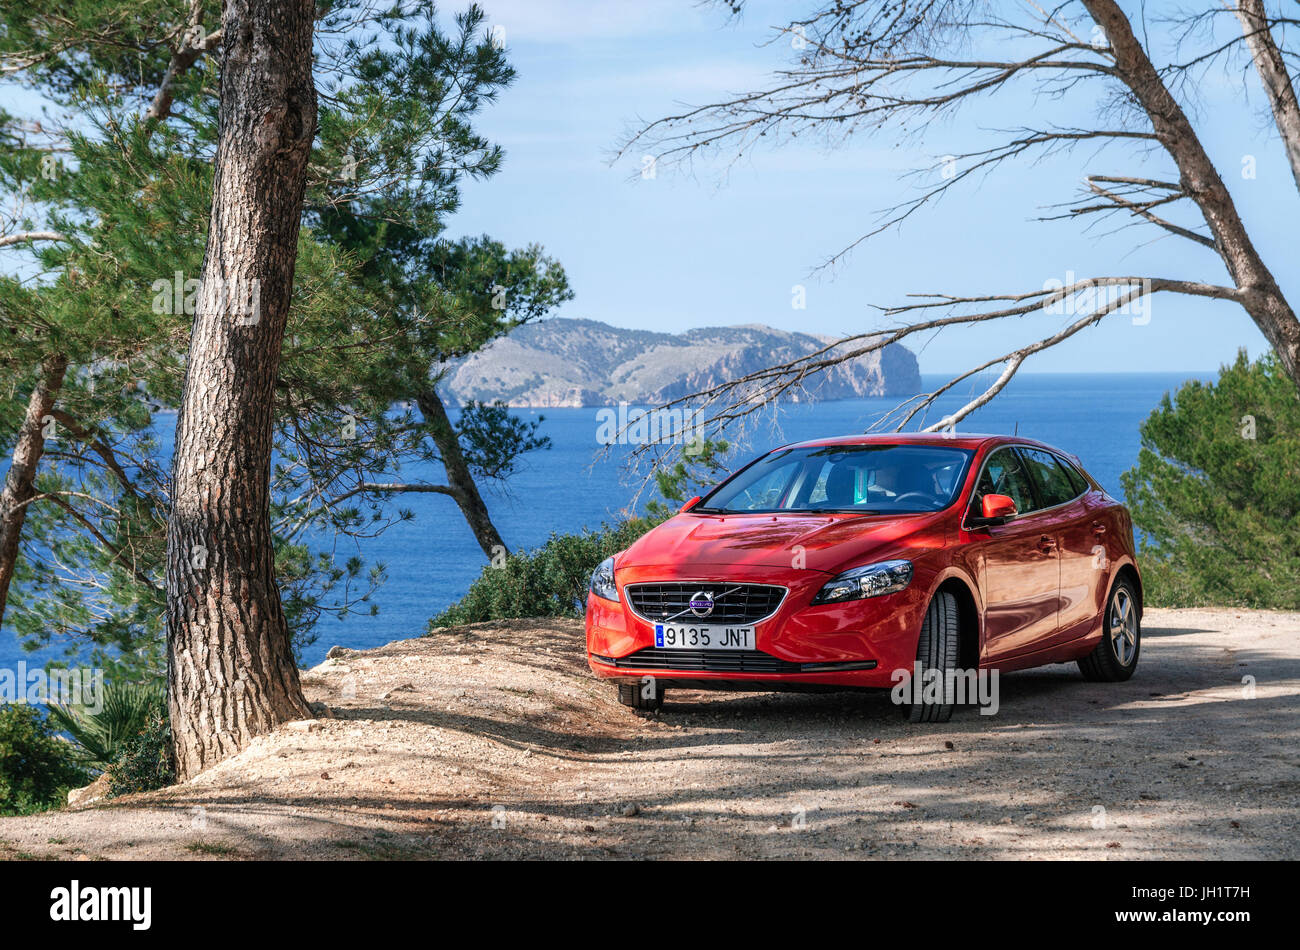 Alcudia, Mallorca, Spain - May 23, 2016: Seascape of Mediterranean Sea with a red car Volvo V40 traveling on the mountain serpentine through the pine  Stock Photo